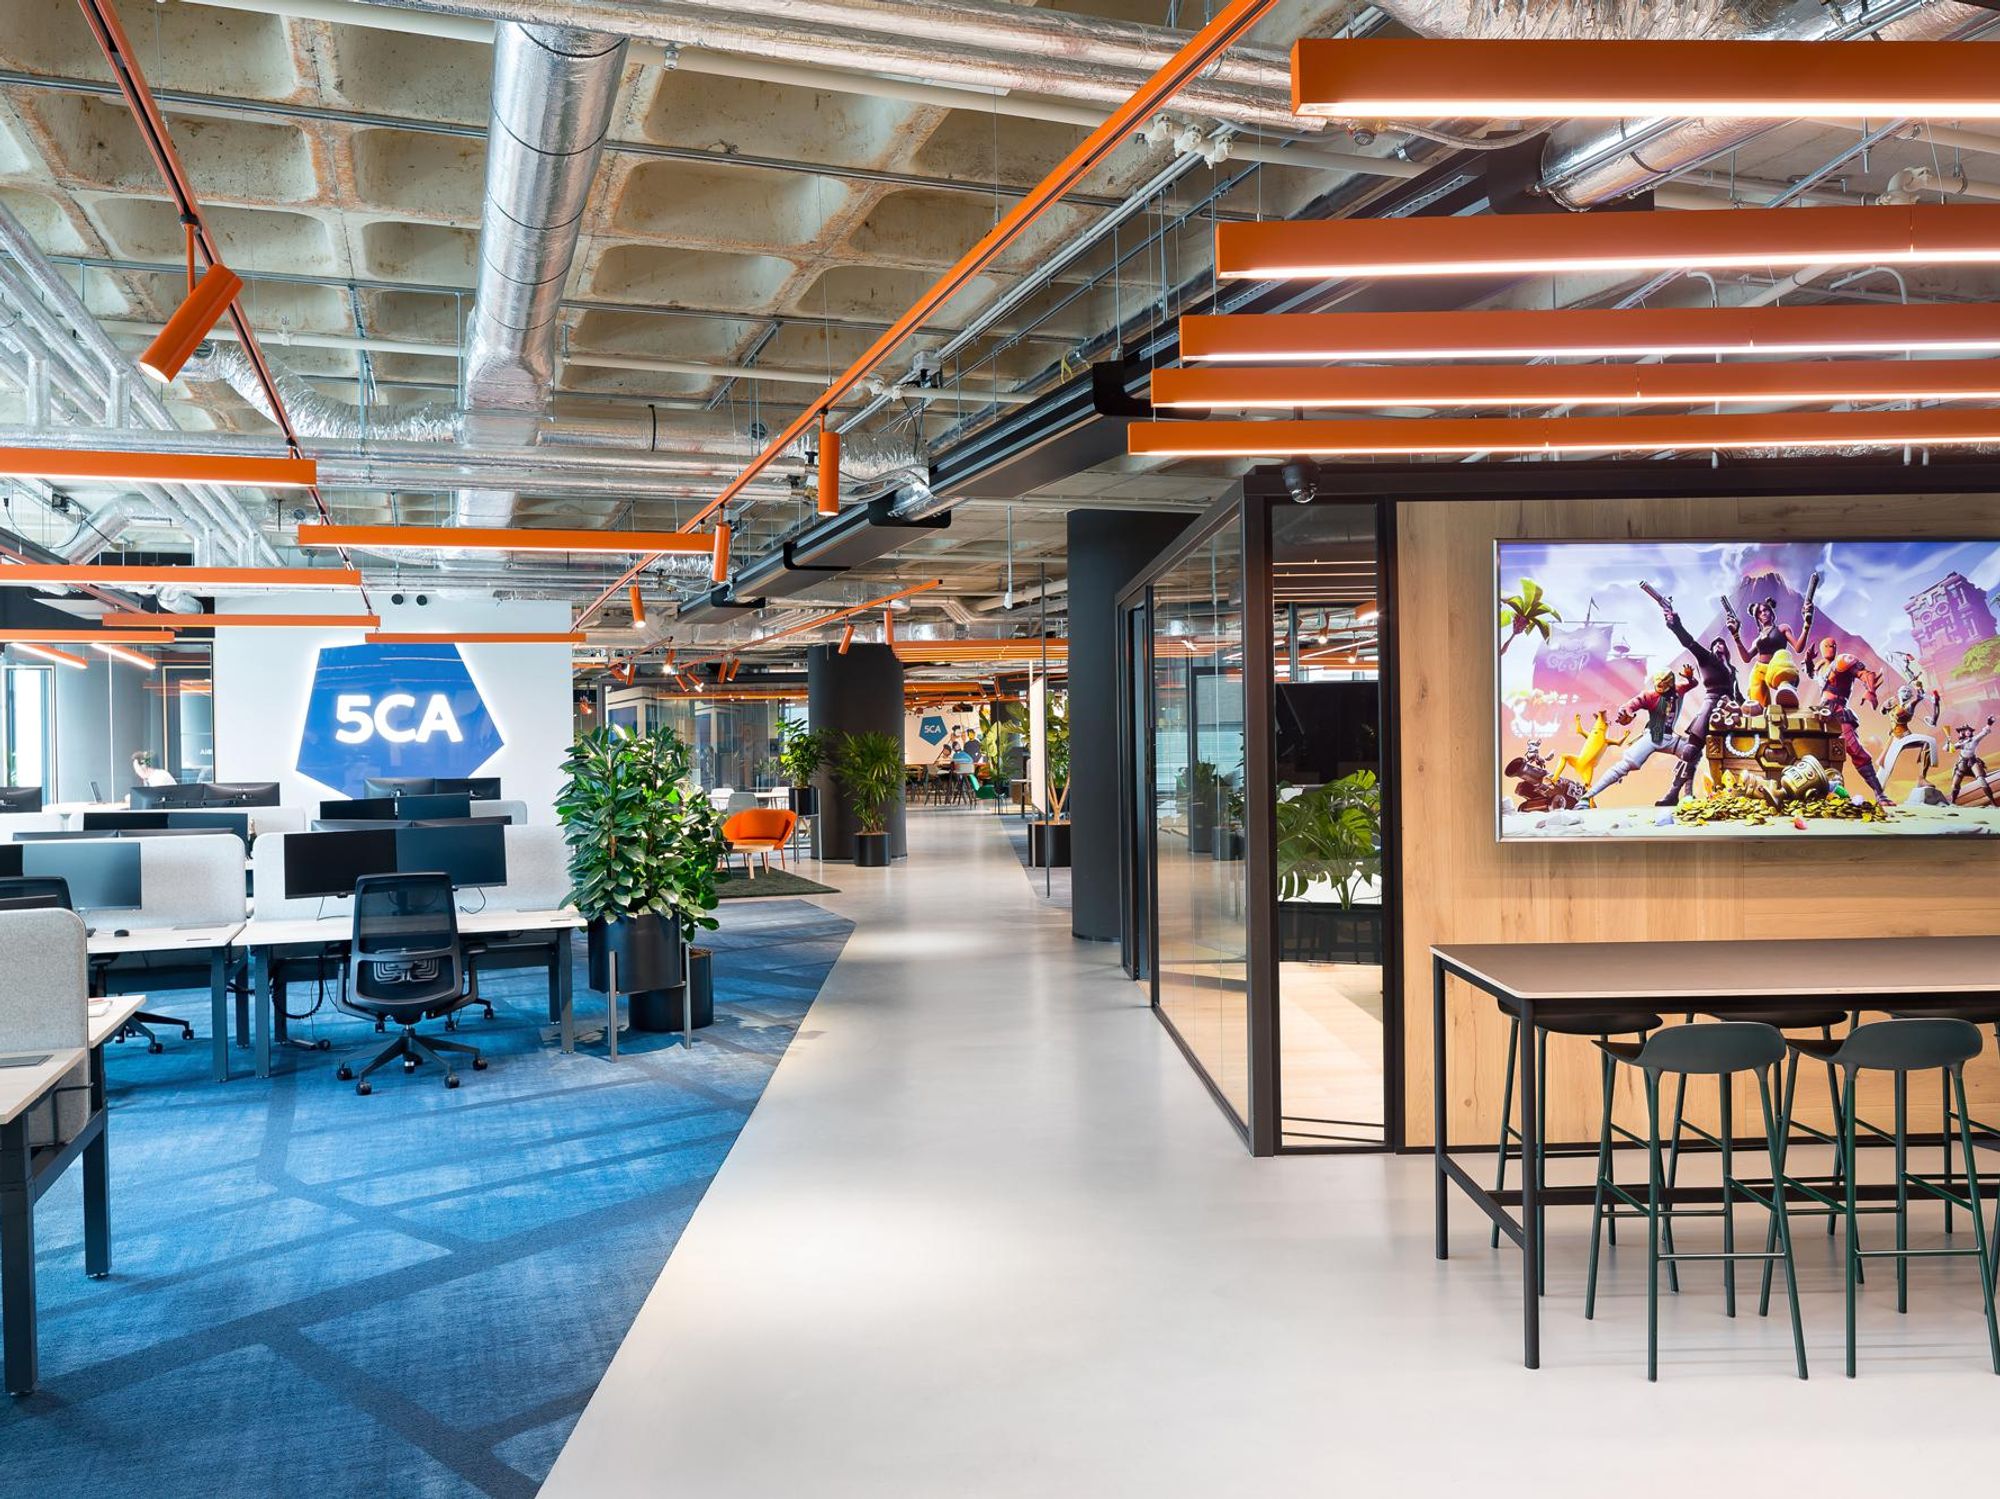 5CA works with many gaming companies to improve their customer experience.